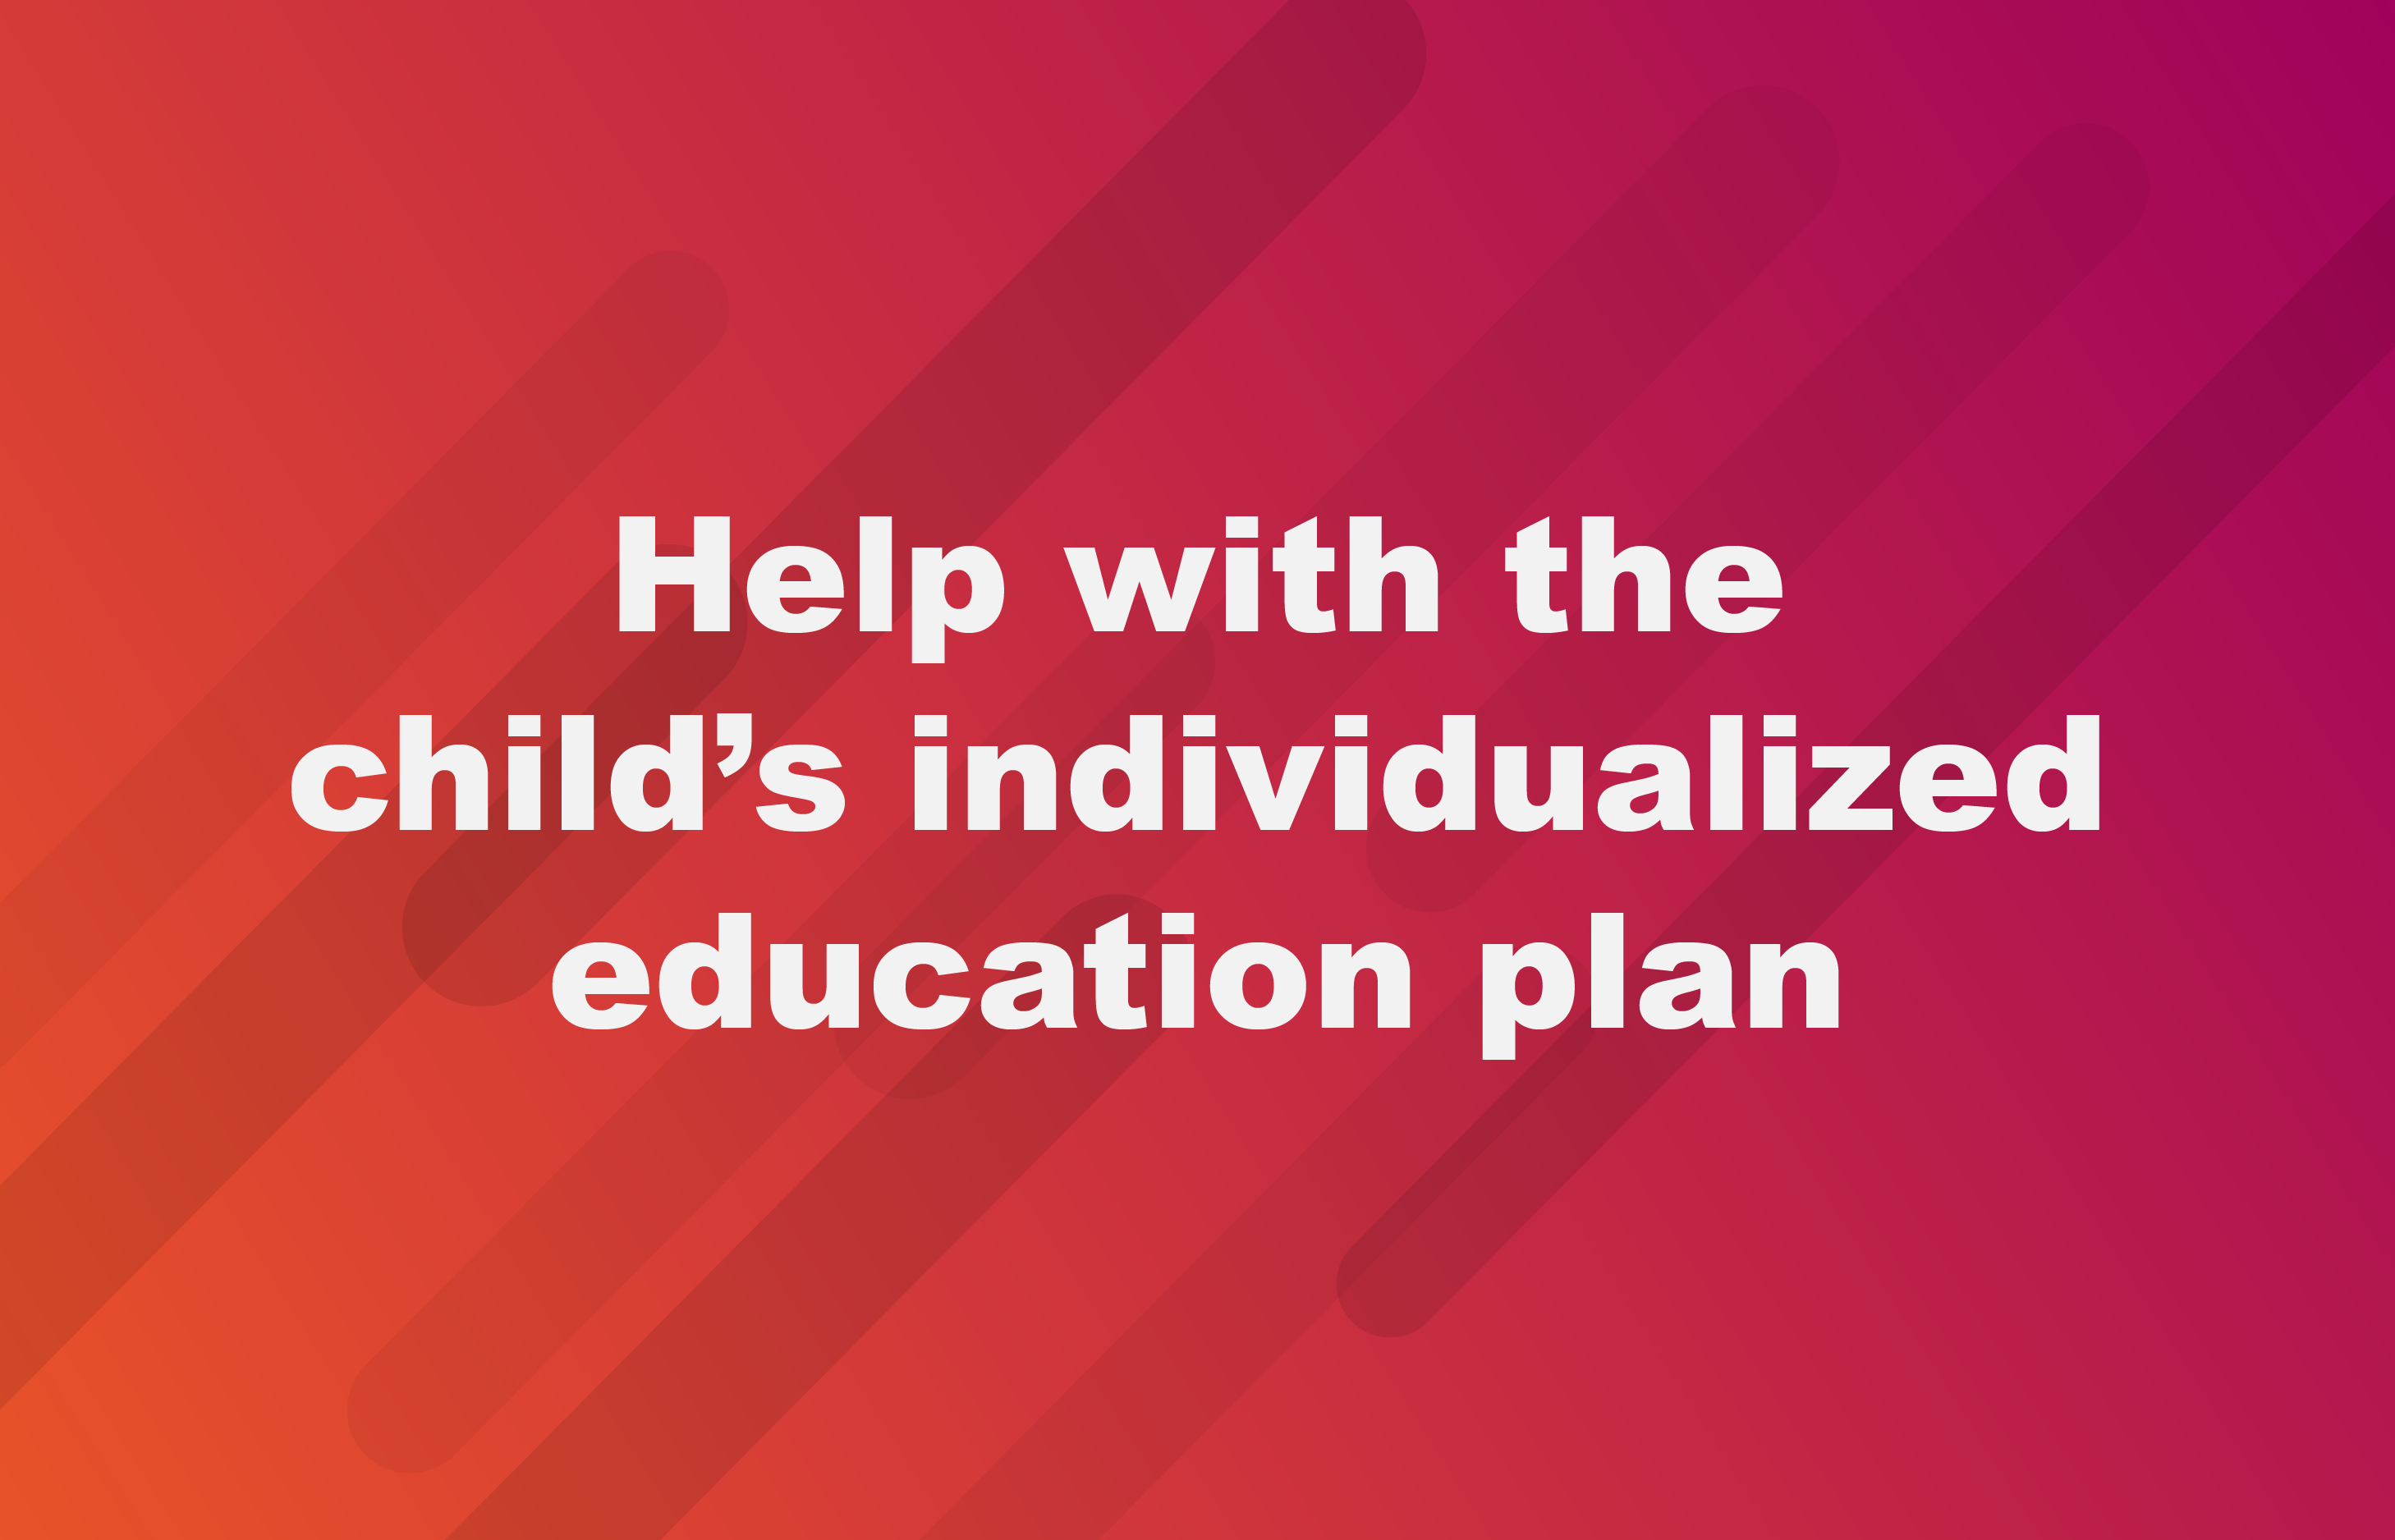 Help with the child’s individualized education plan